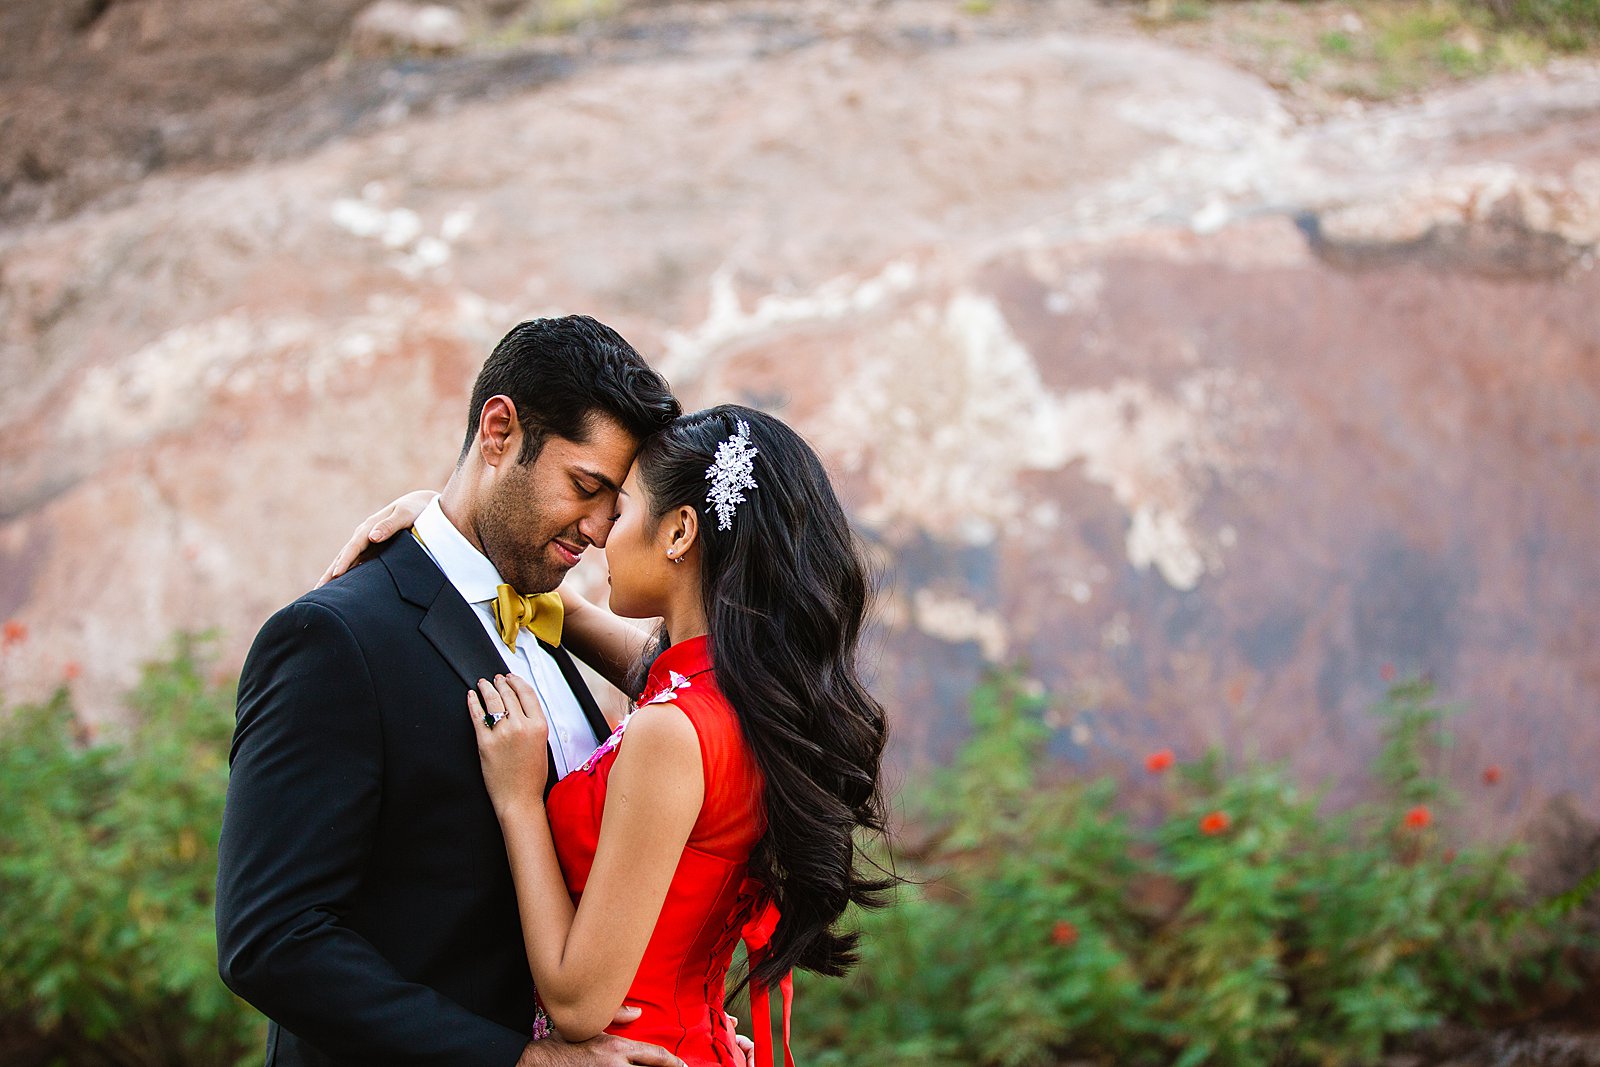 Bride and Groom share an intimate moment during their multicultural wedding by Phoenix wedding photographer PMA Photography.